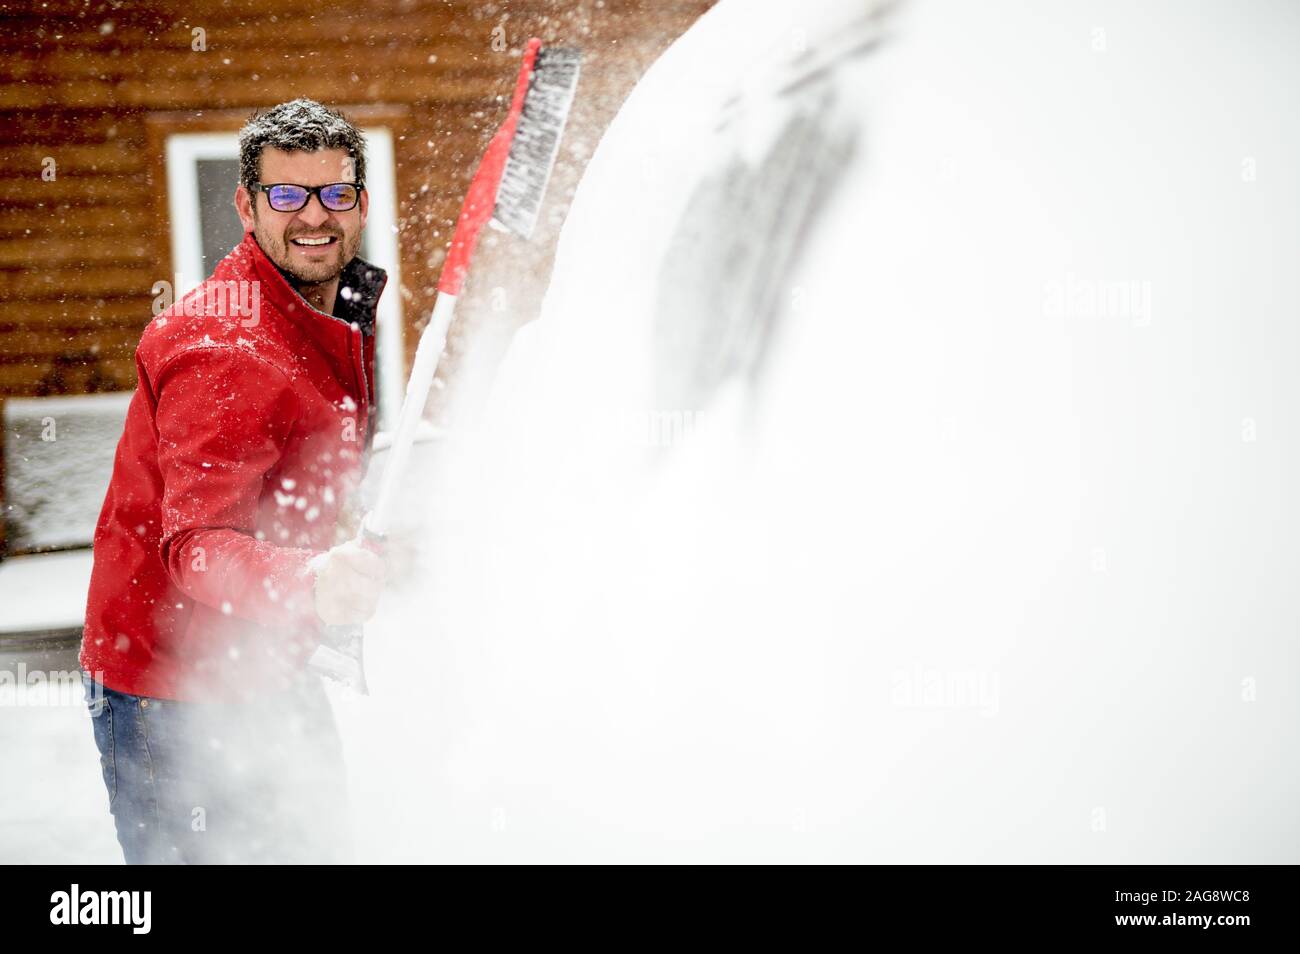 Male wearing a red winter jacket and cleaning snow off the car's window Stock Photo